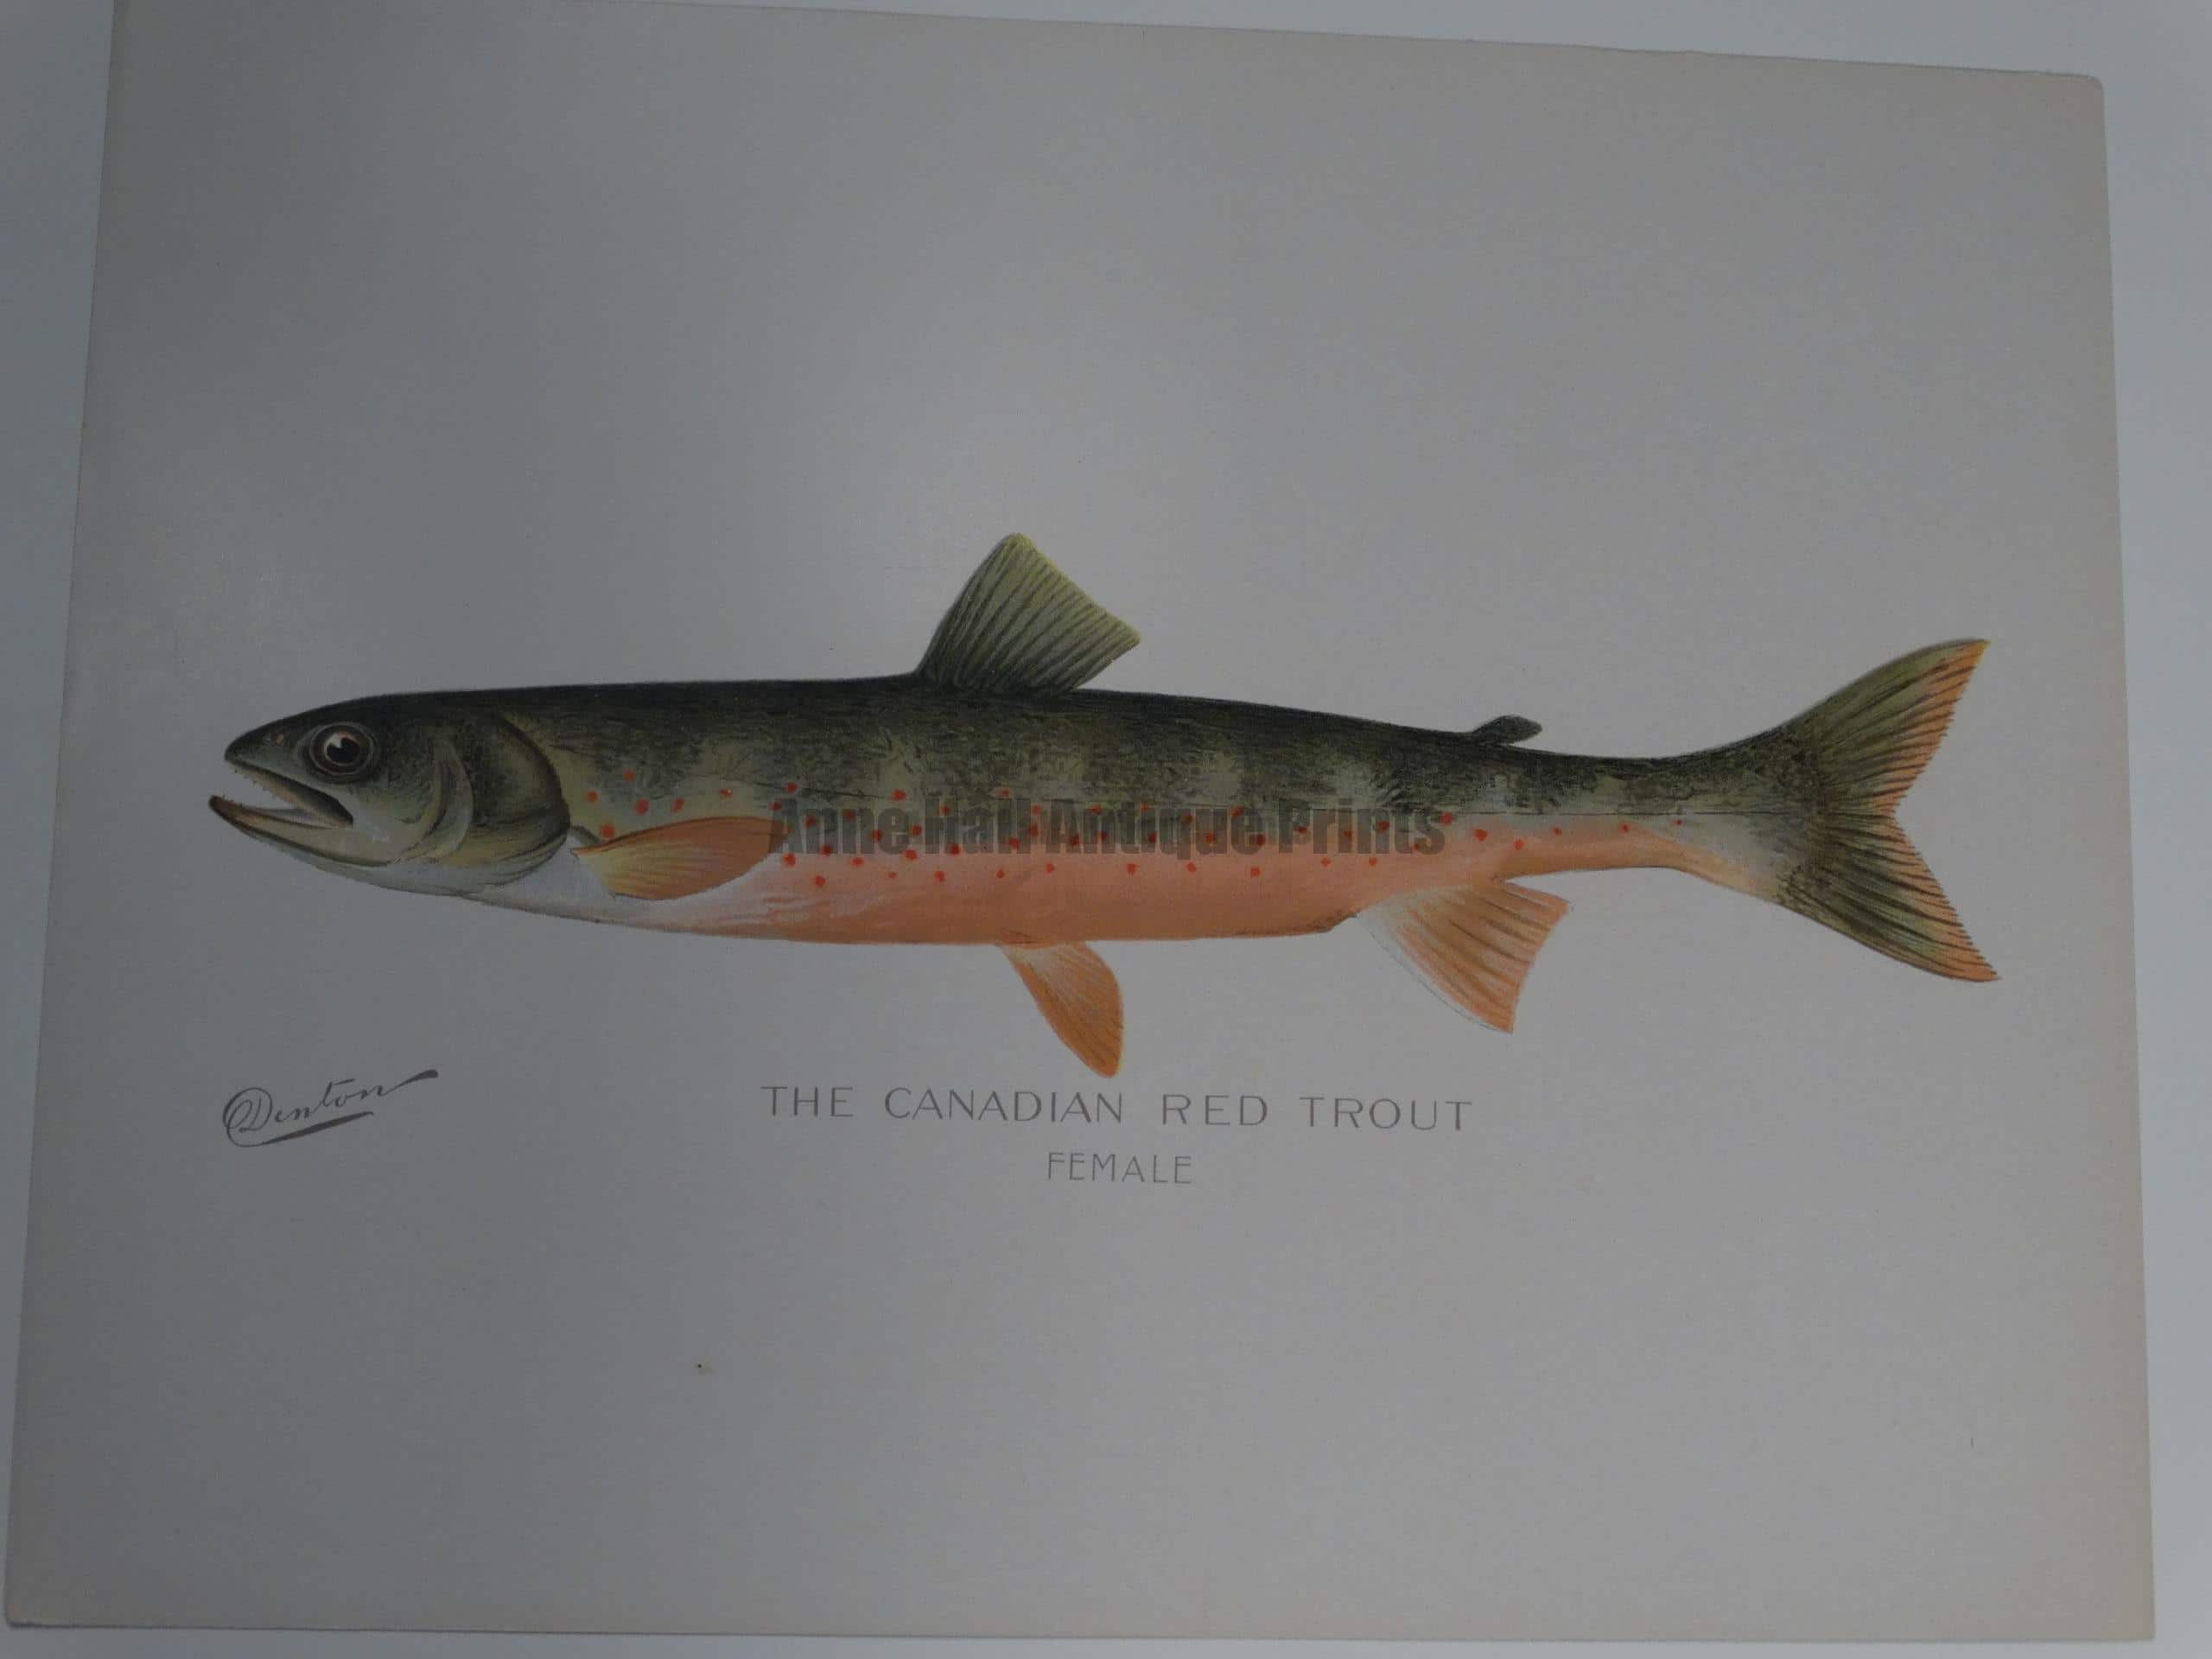 Denton Canadian Red Trout Female $75.  An outstanding portfolio color lithograph.